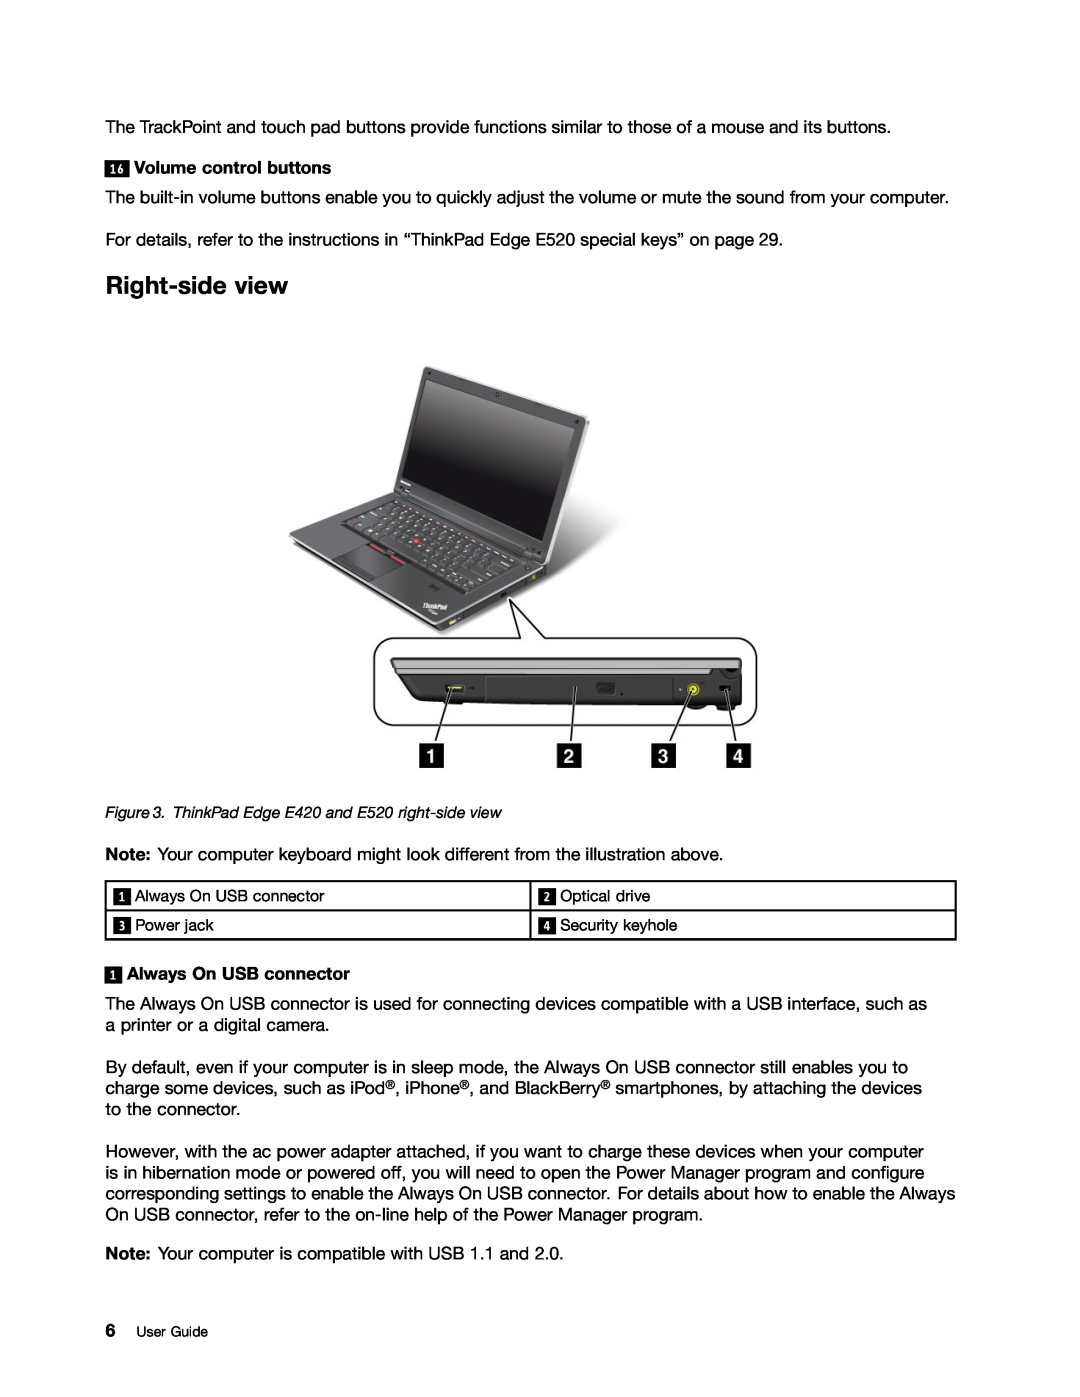 Lenovo E520 Right-side view, Volume control buttons, Always On USB connector, Optical drive, Power jack, Security keyhole 